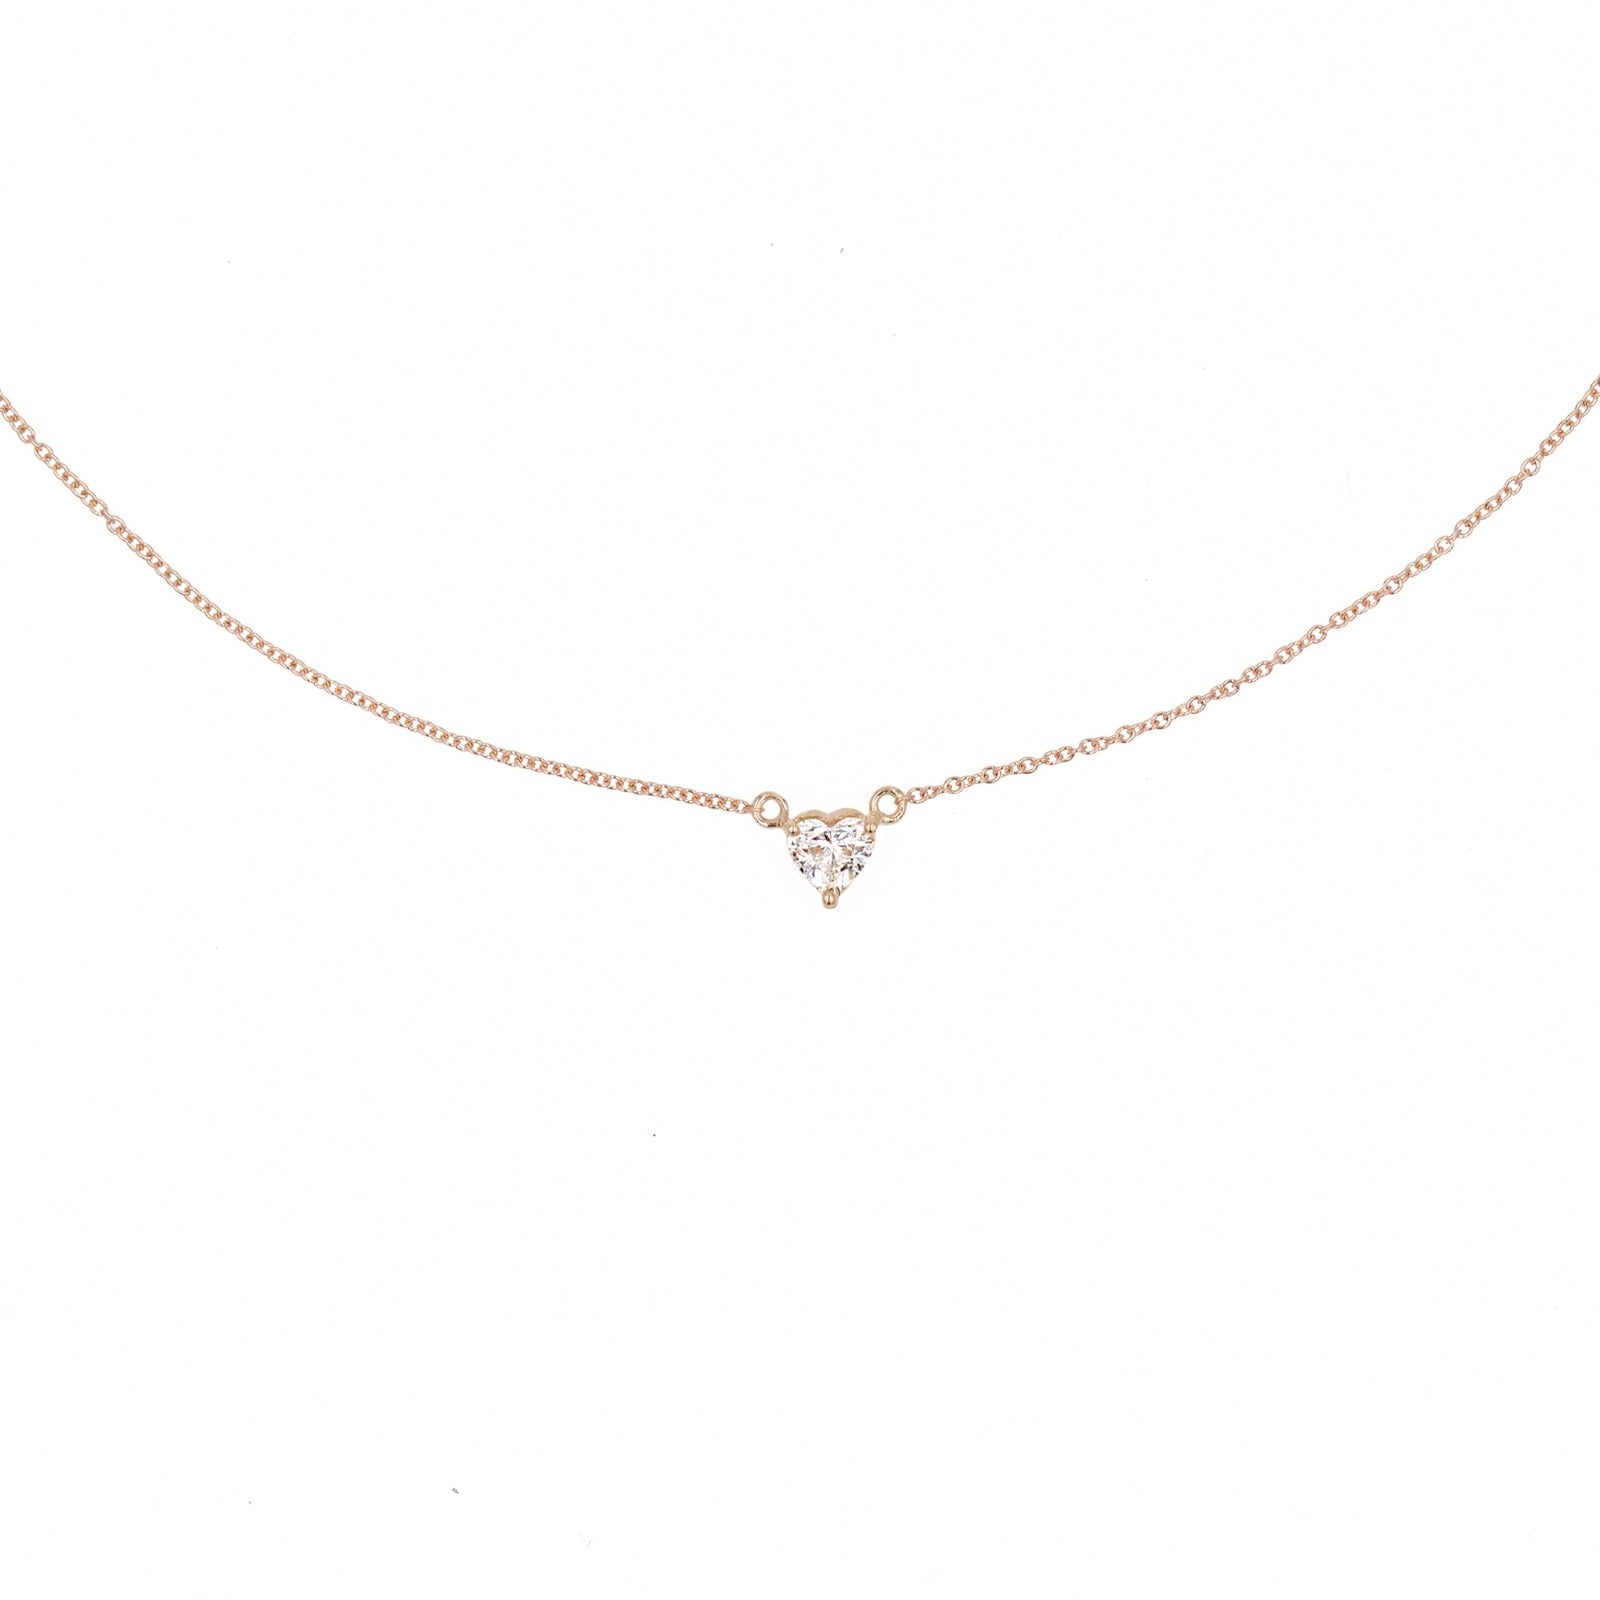 Necklace with heart cut diamond